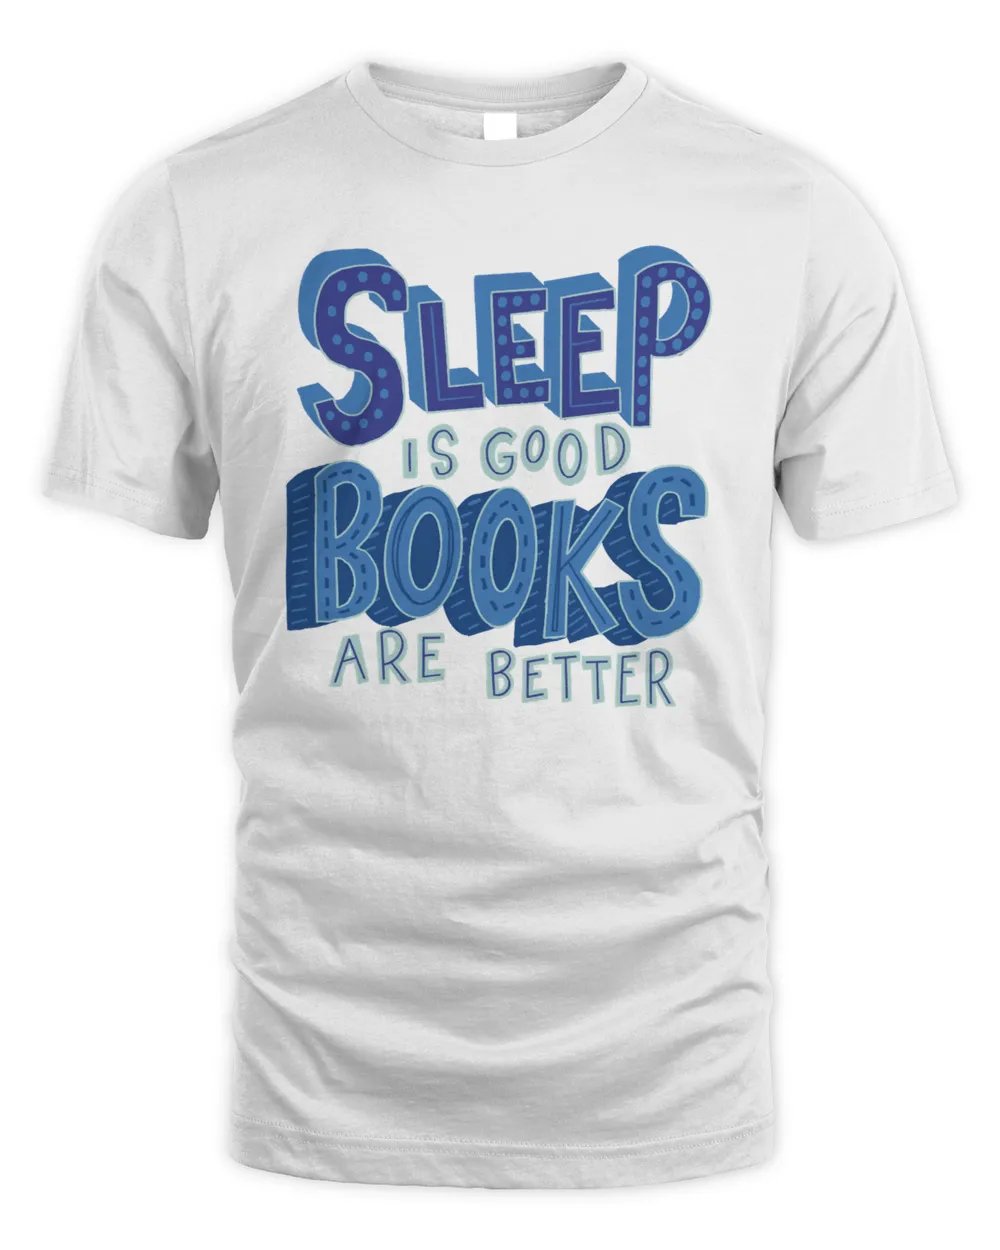 Book Sleep is Good but Books are Better 98 booked